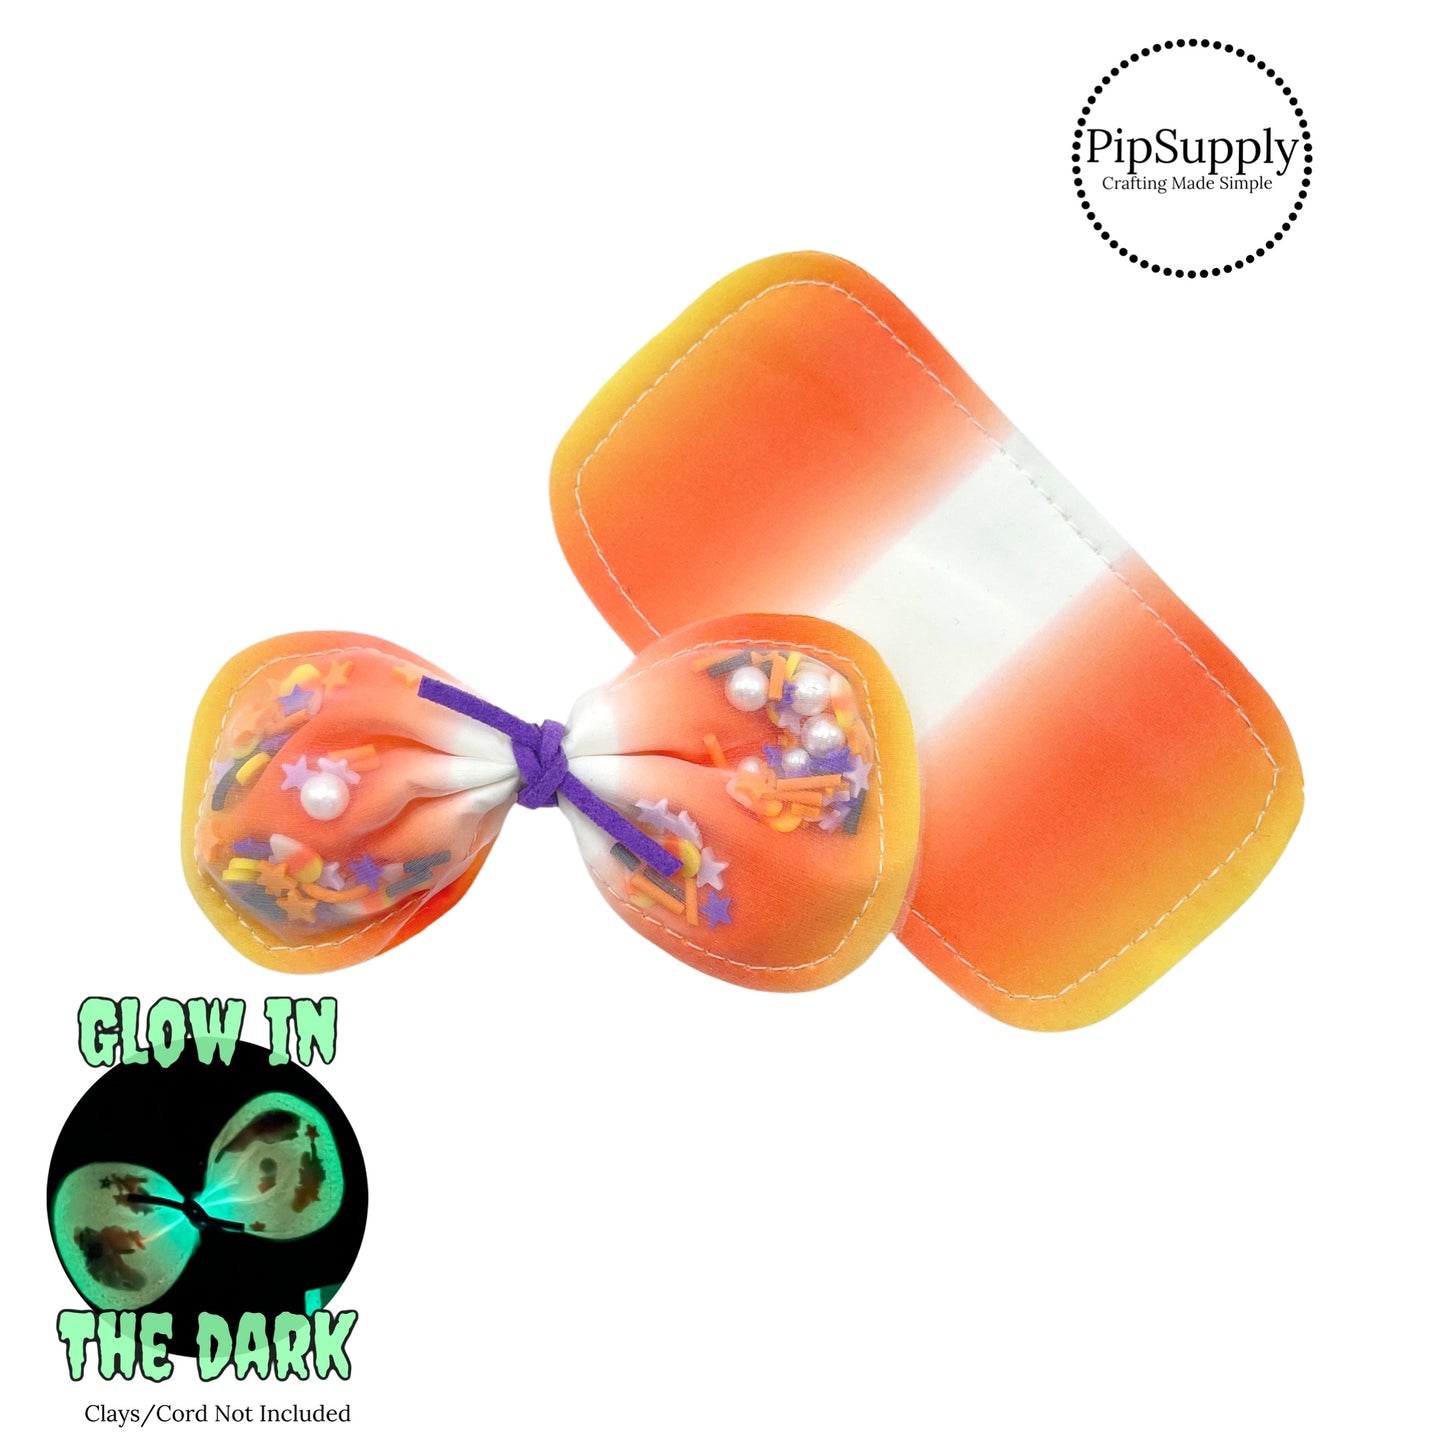 Orange and white candy corn glow in the dark shaker pouch